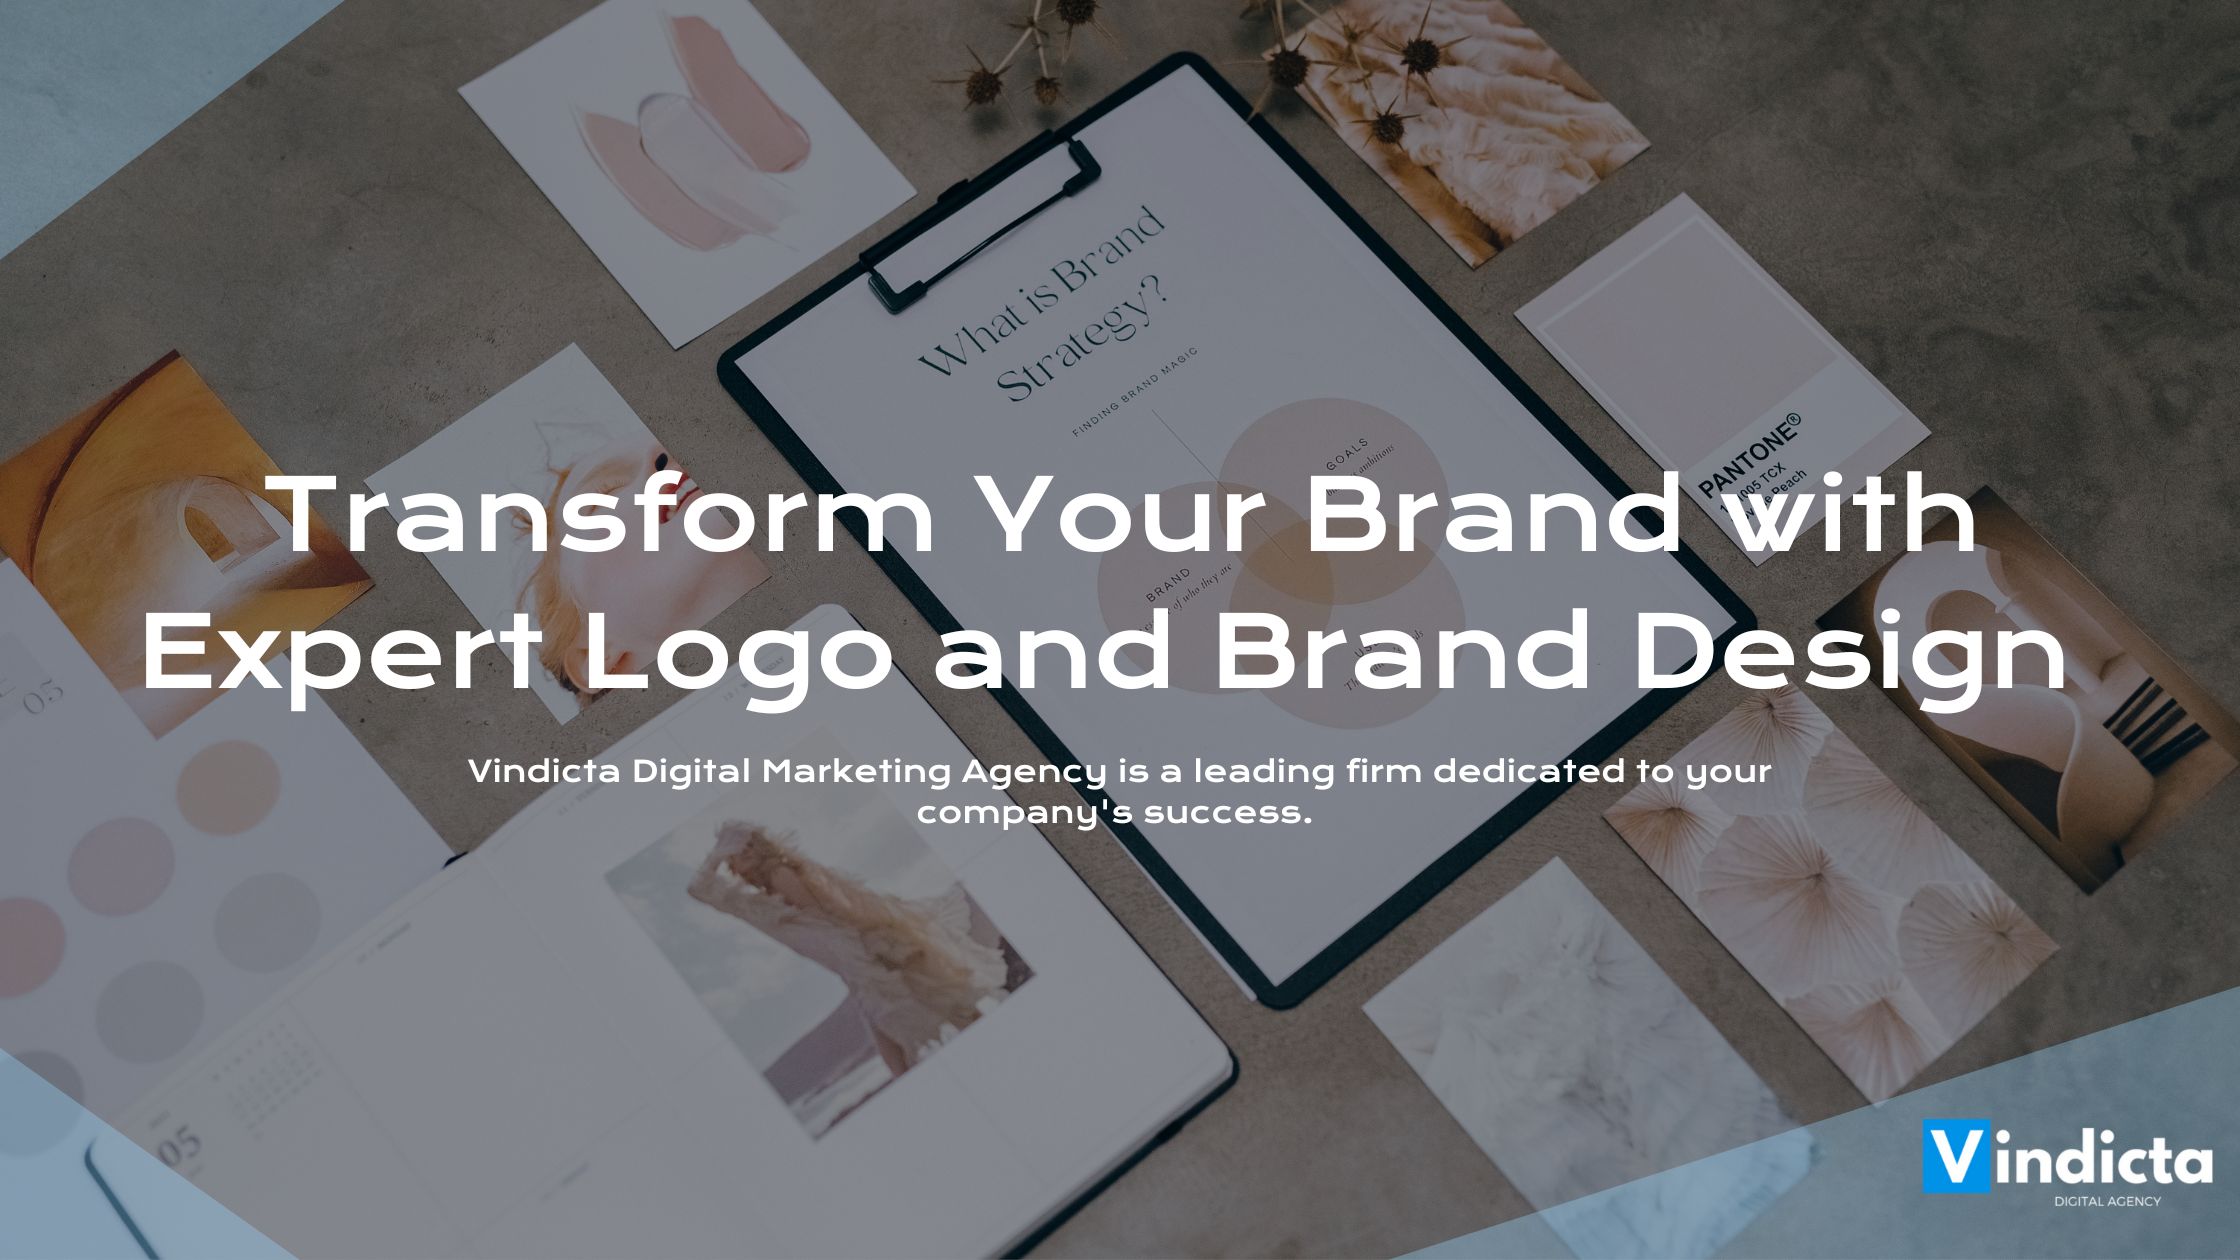 Transform Your Brand with Expert Logo and Brand Design Services by Vindicta